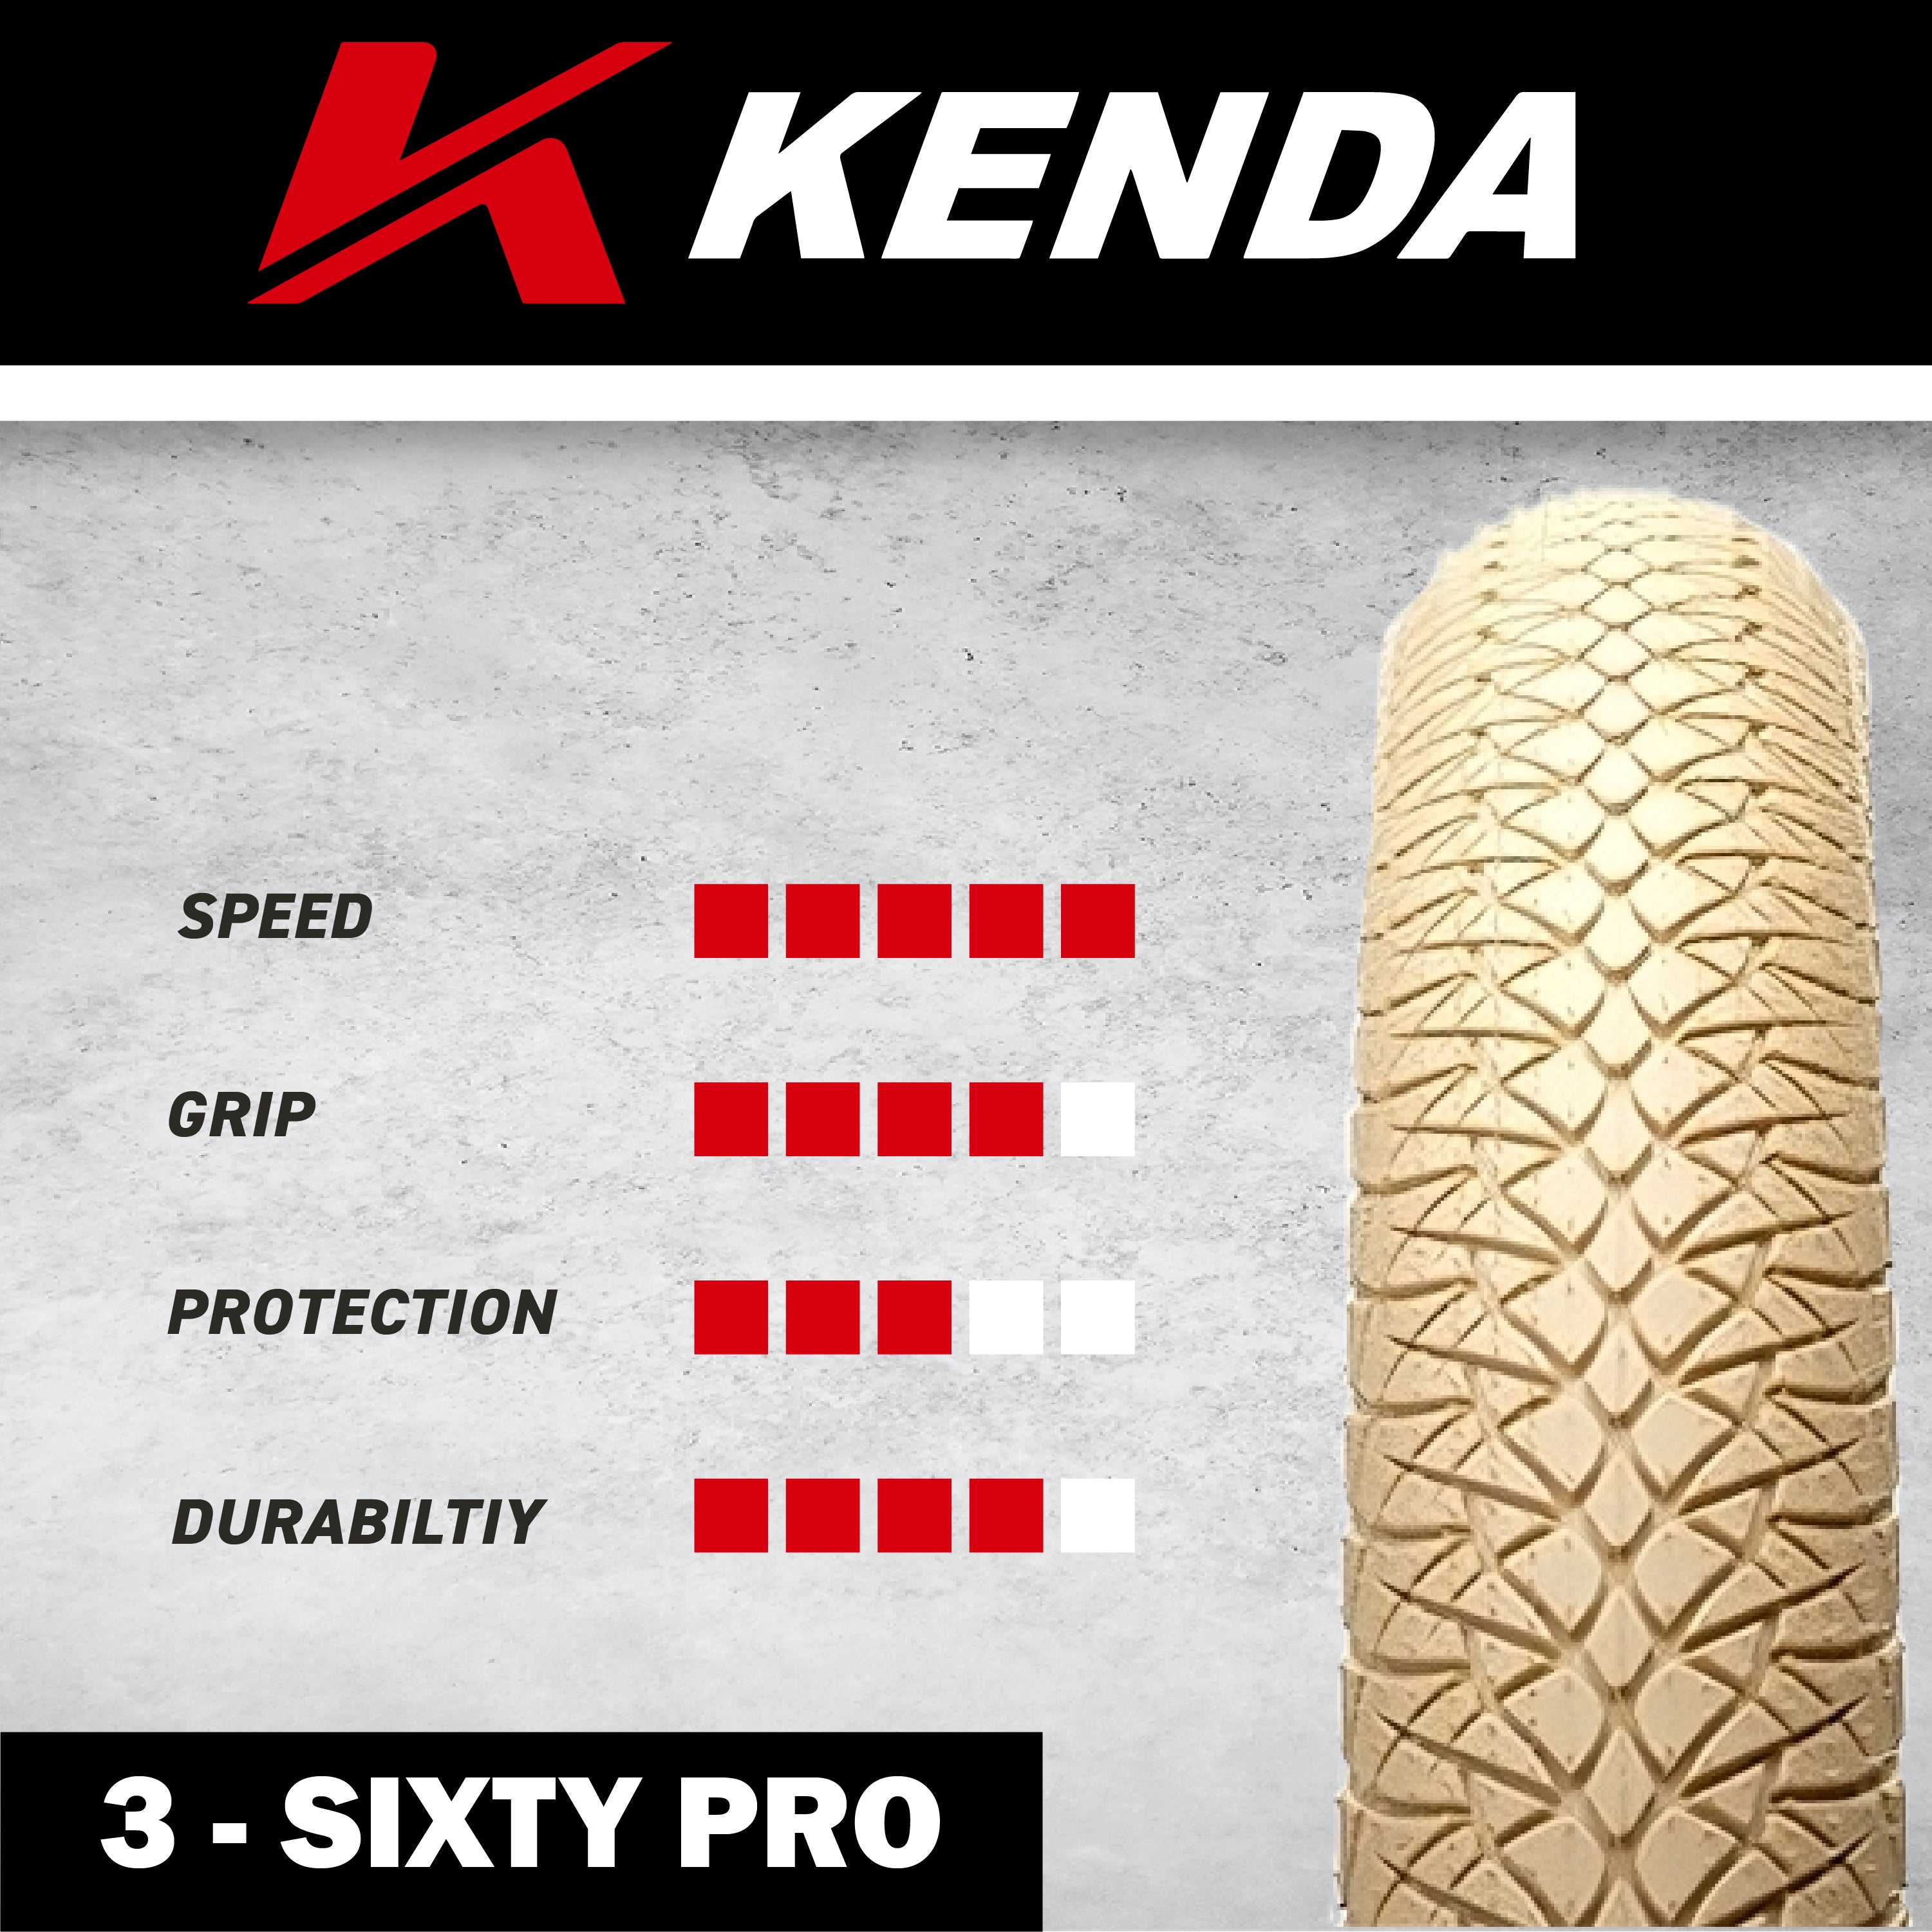 Kenda 3-Sixty Pro TR 120tpi Fold Tan 26x2.5 Bicycle Tire & Keychain (Two Pack)